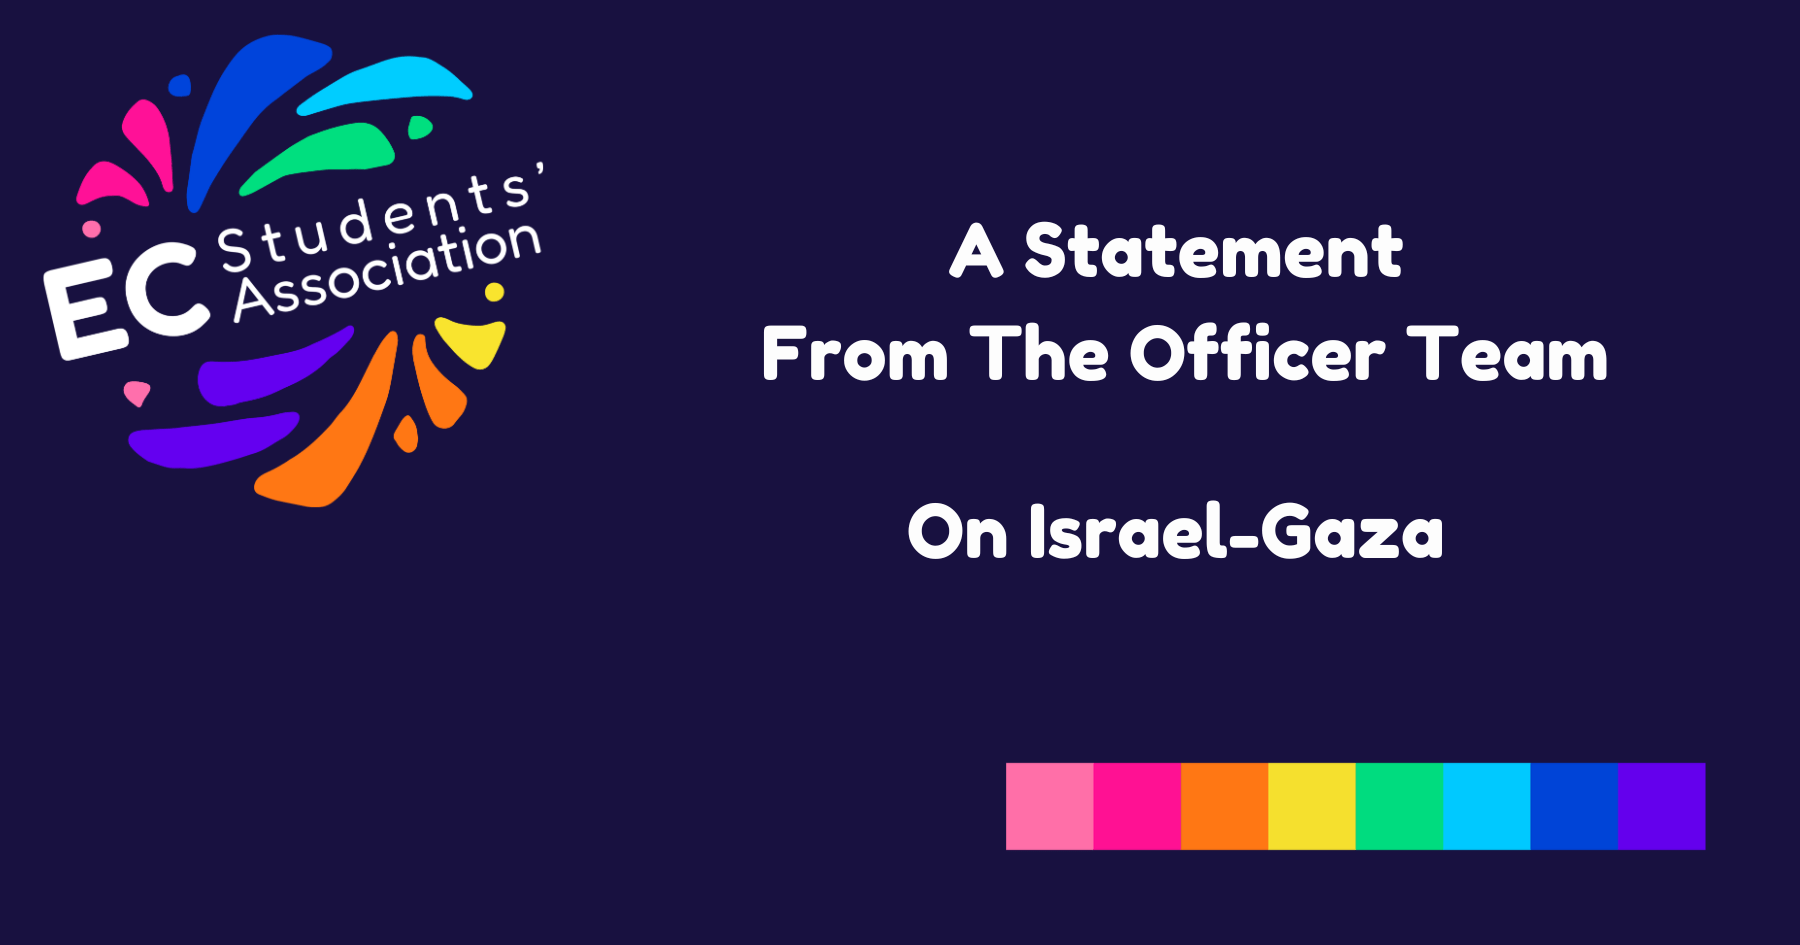 Statement From The Officer Team on Israel-Gaza